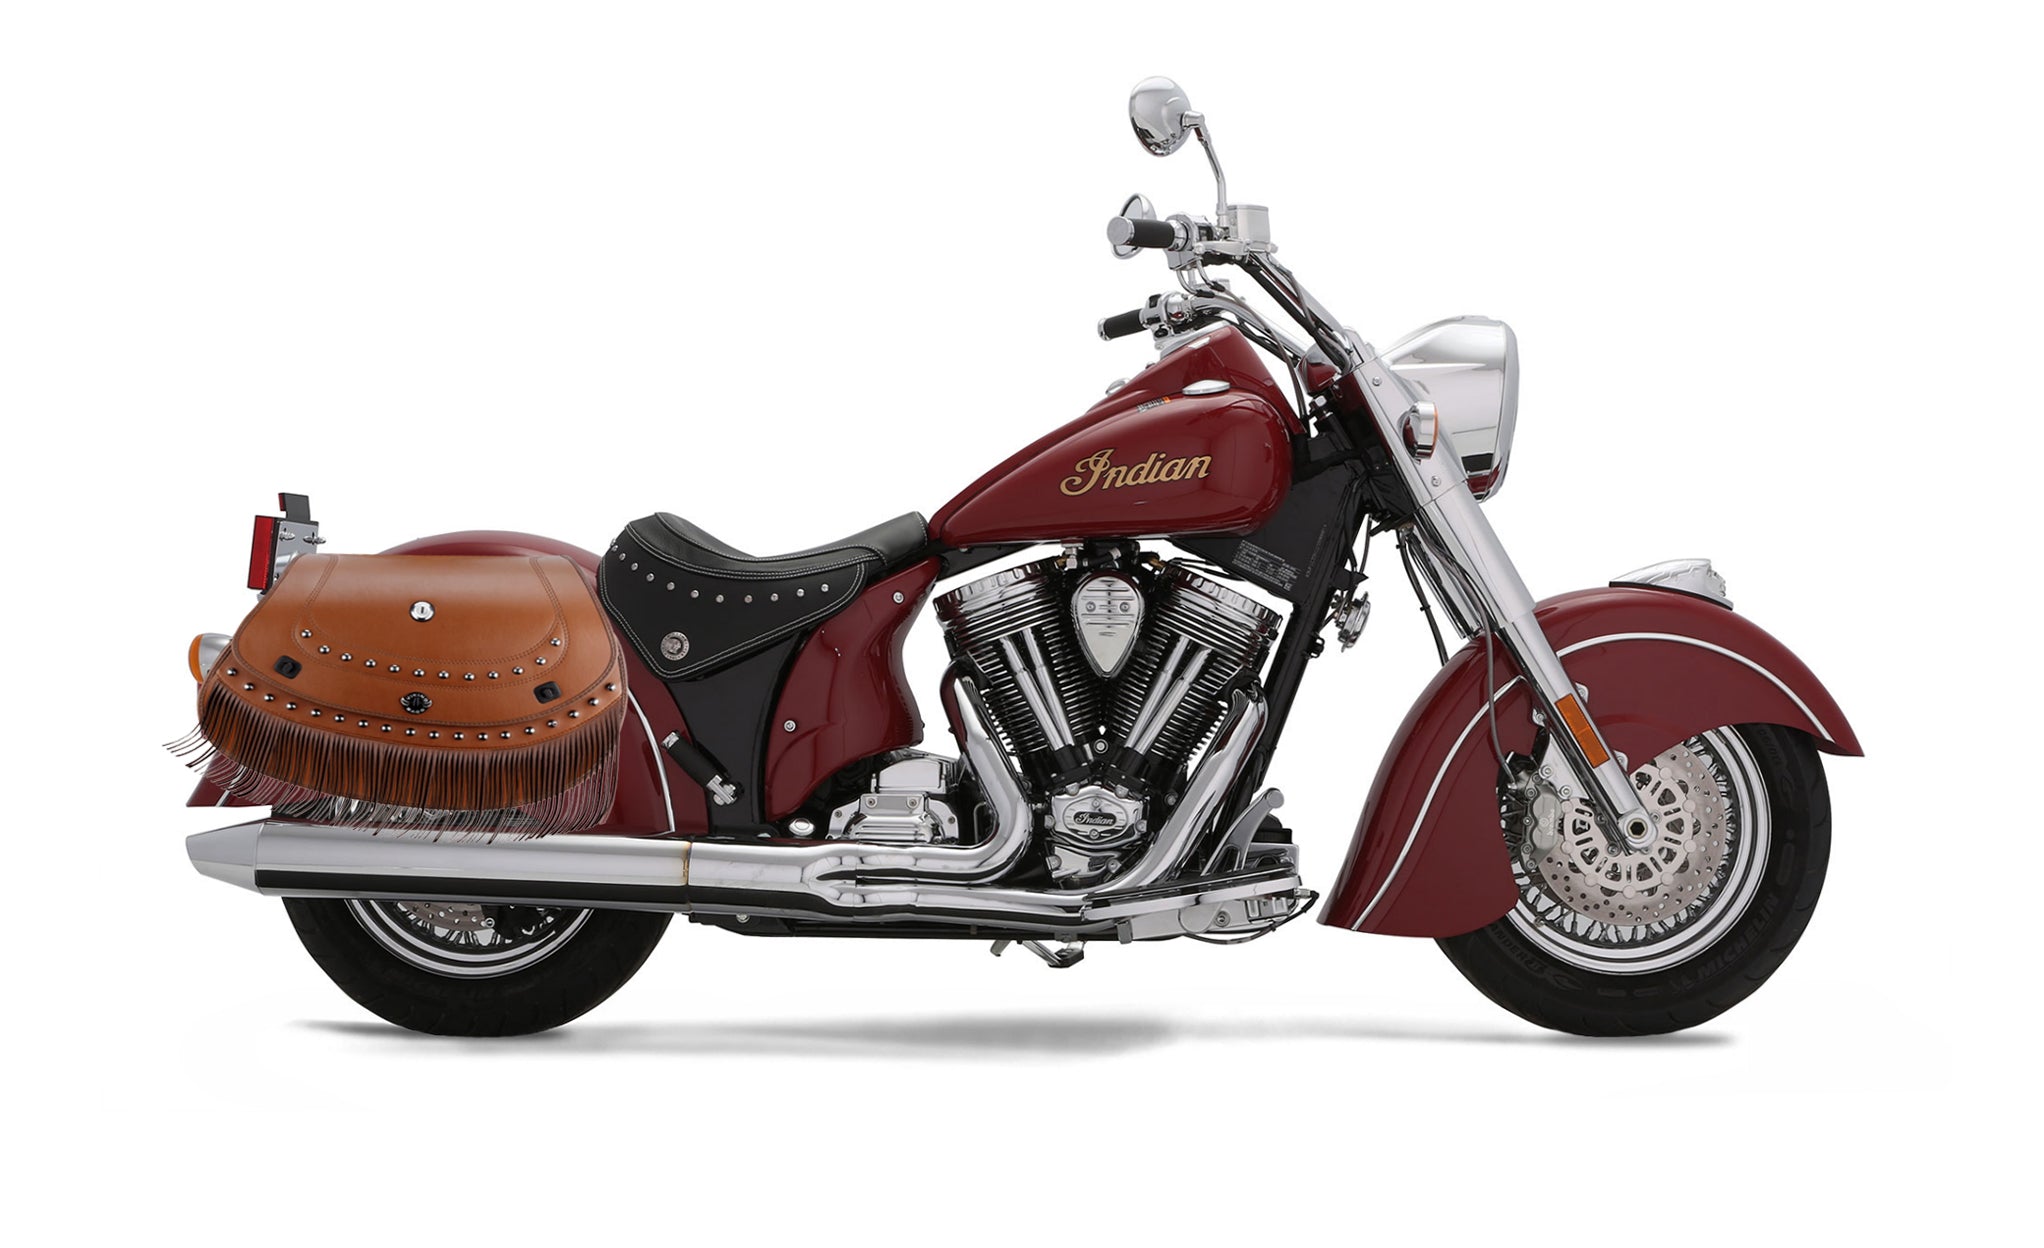 Viking Mohawk Extra Large Indian Chief Deluxe Specific Leather Motorcycle Saddlebags on Bike Photo @expand